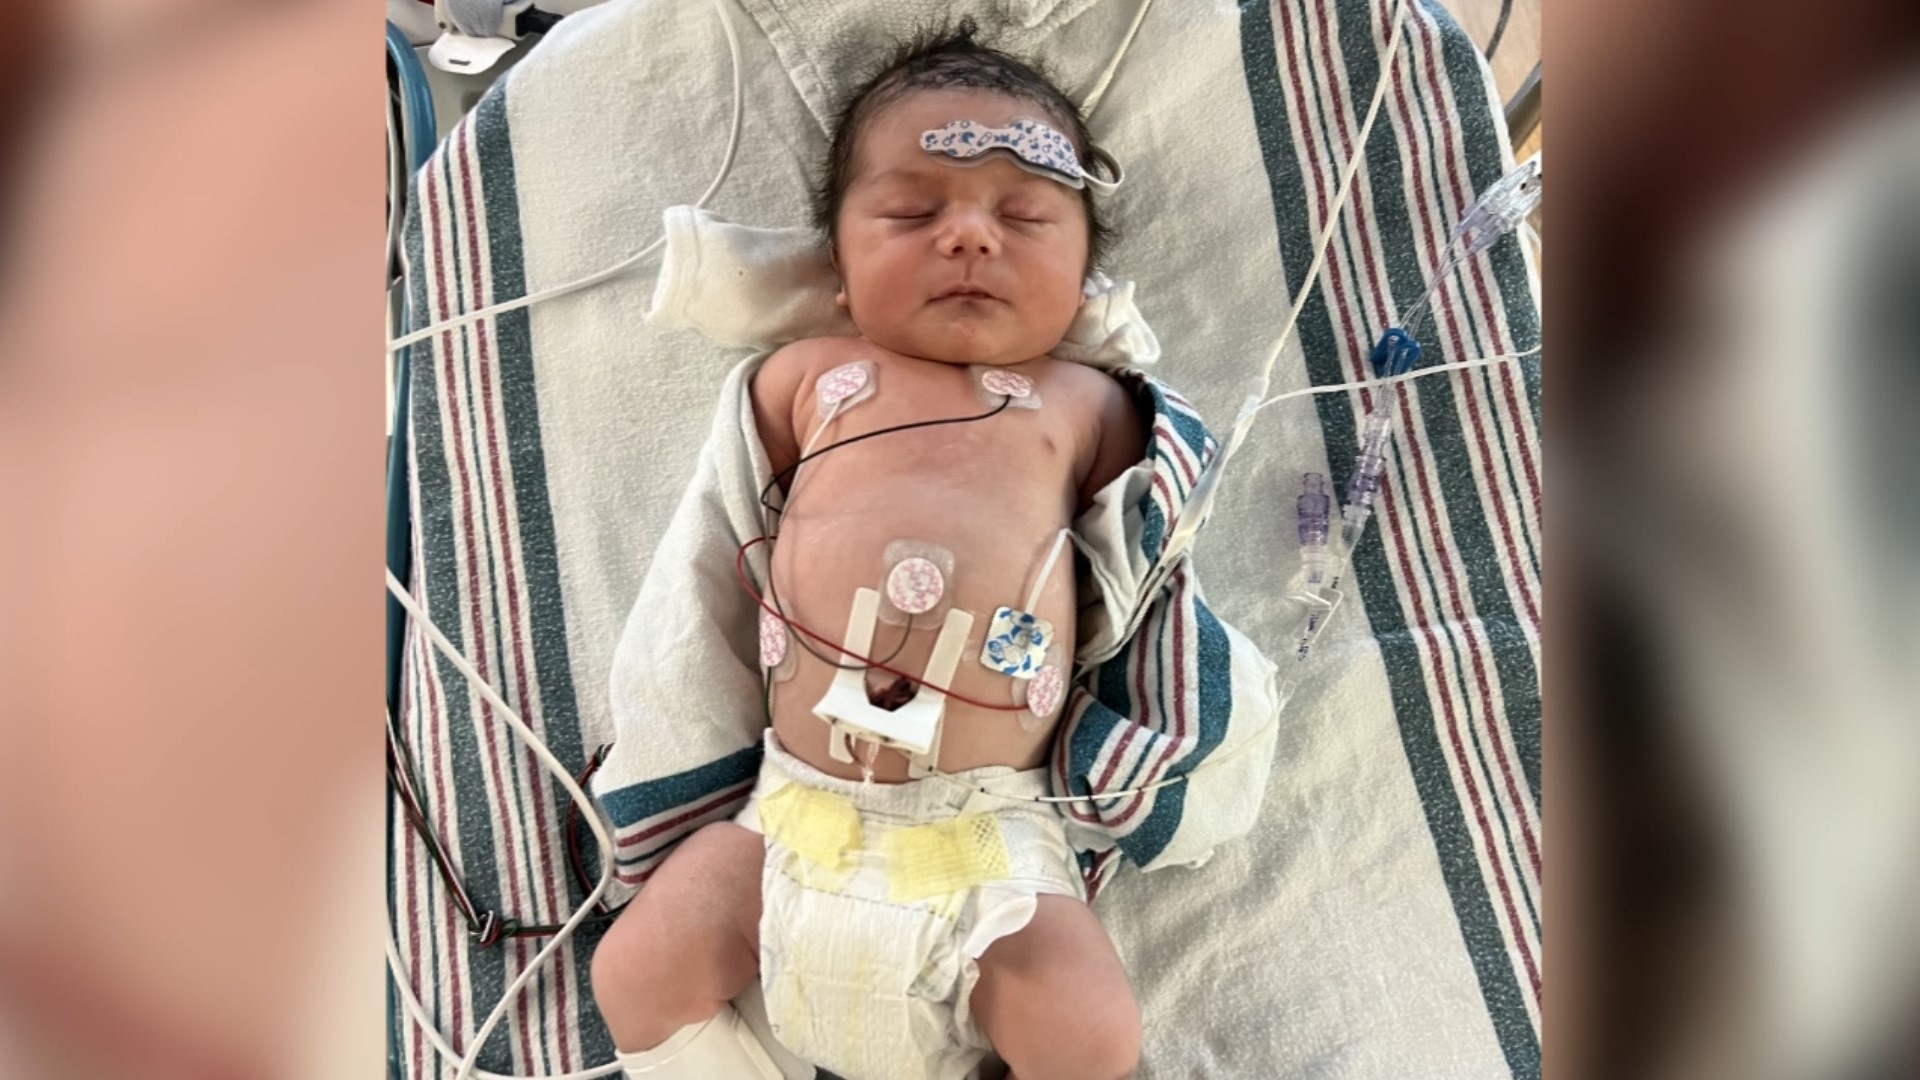 Volunteers in Fayetteville are working to raise funds for a baby in need of a life-saving heart transplant through donations, events and shirt sales.